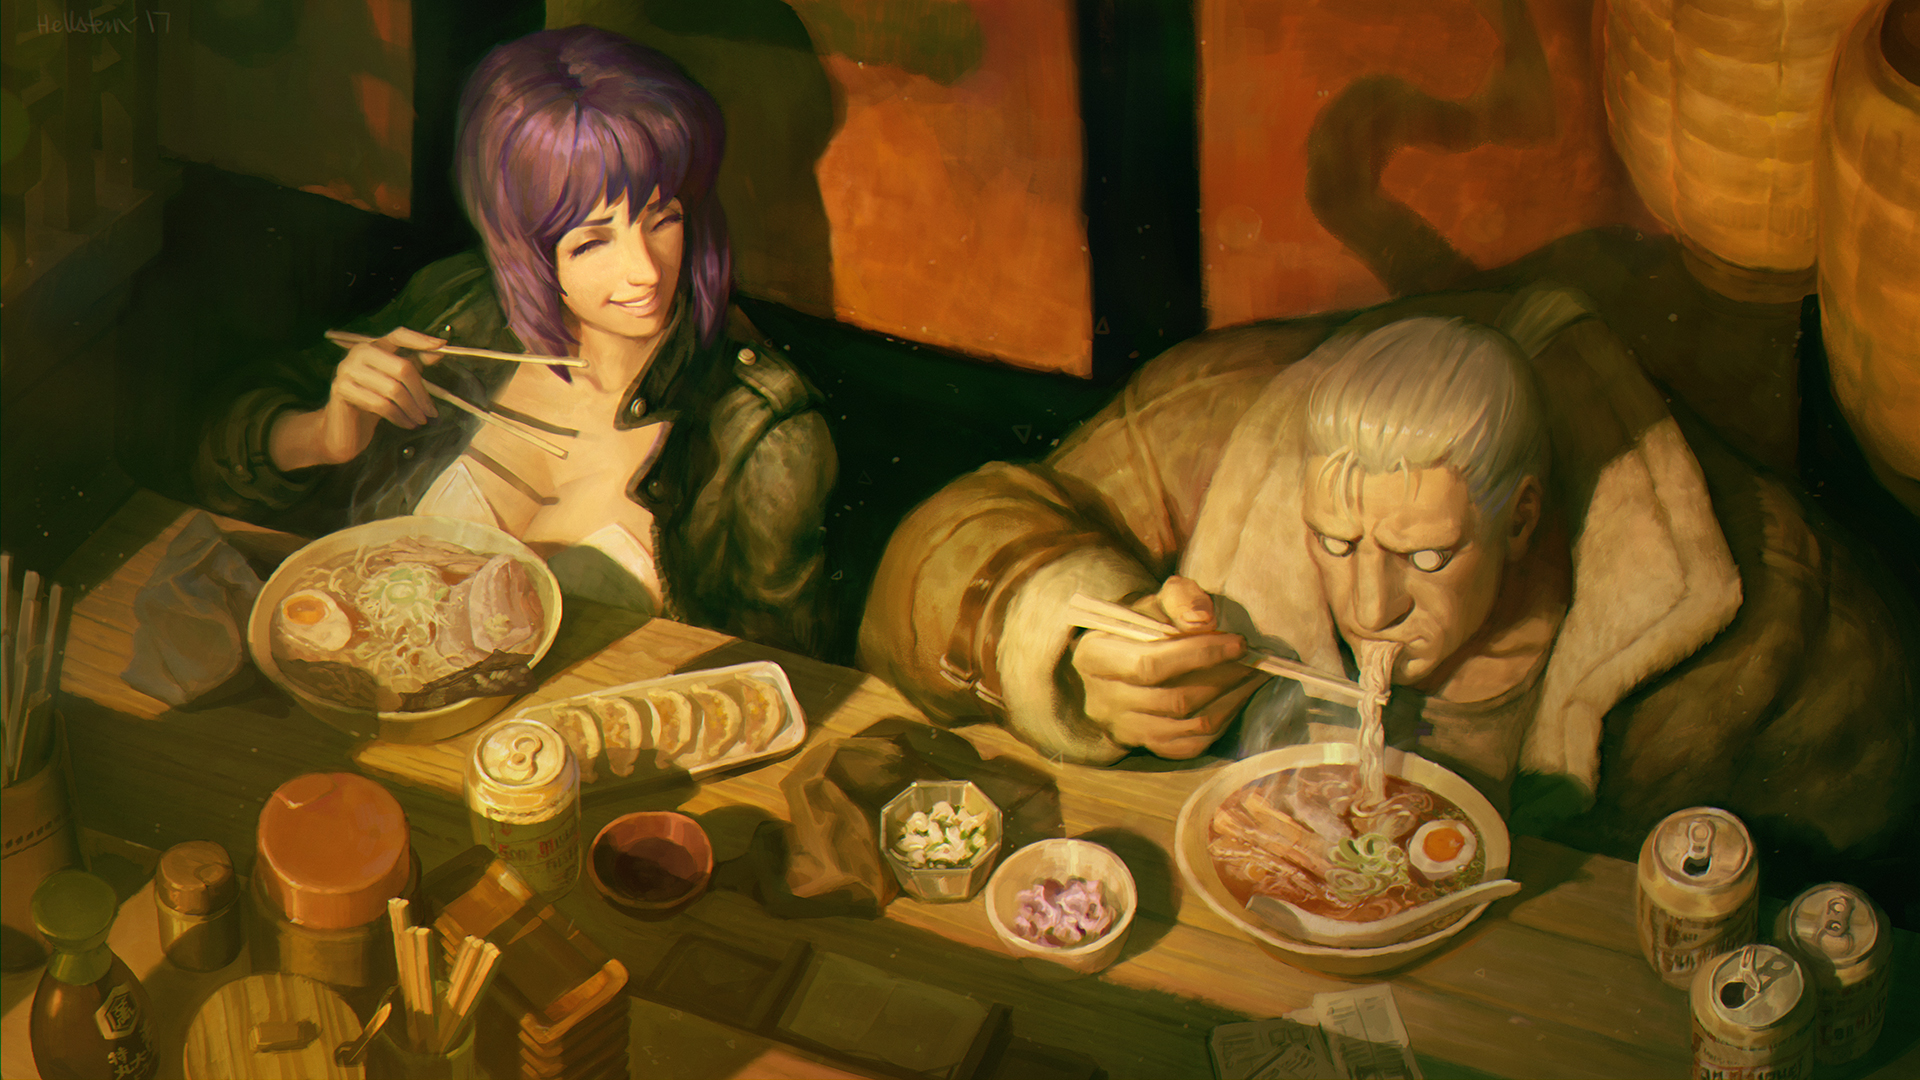 all_i_need__ghost_in_the_shell_fanart_by_hellstern-db8nfyy.jpg